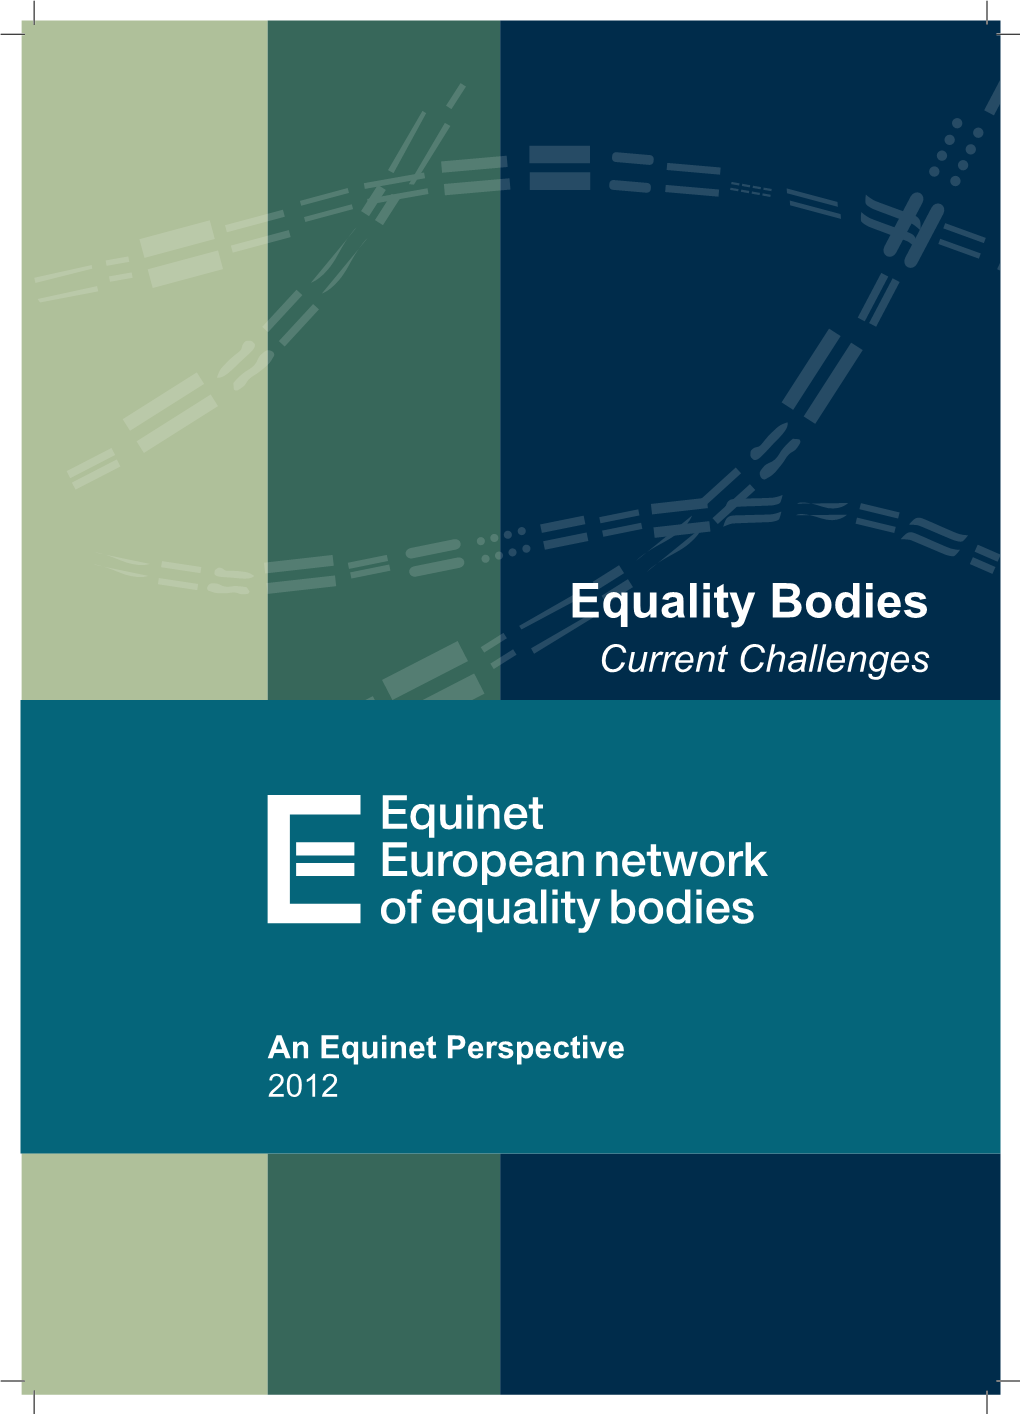 Equality Bodies Current Challenges